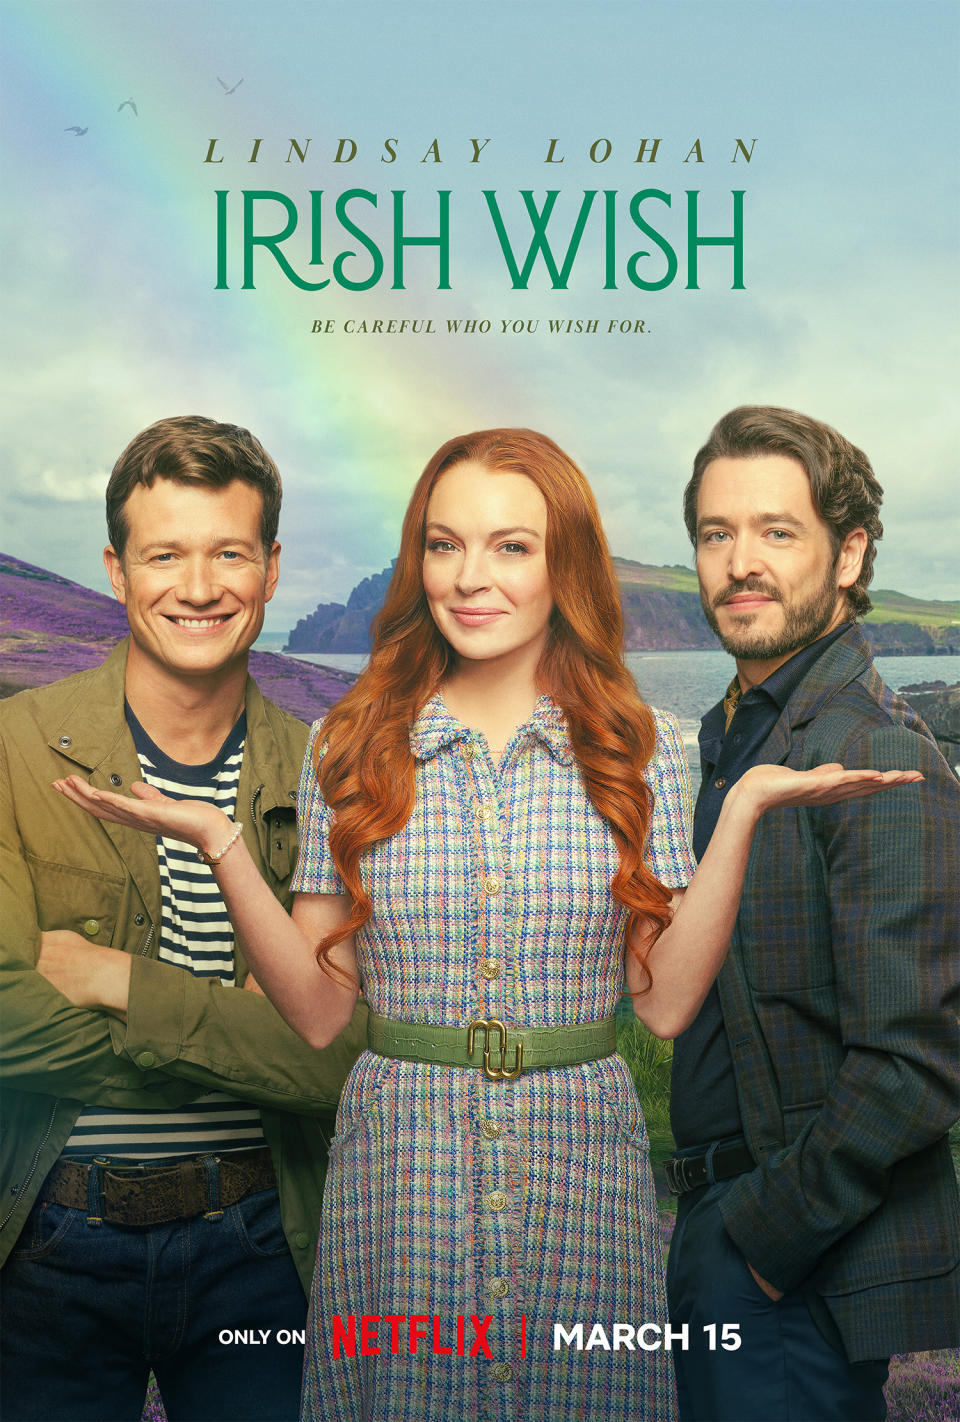 Movie poster for "Irish Wish" showing three smiling actors, with text announcing its Netflix release on March 15